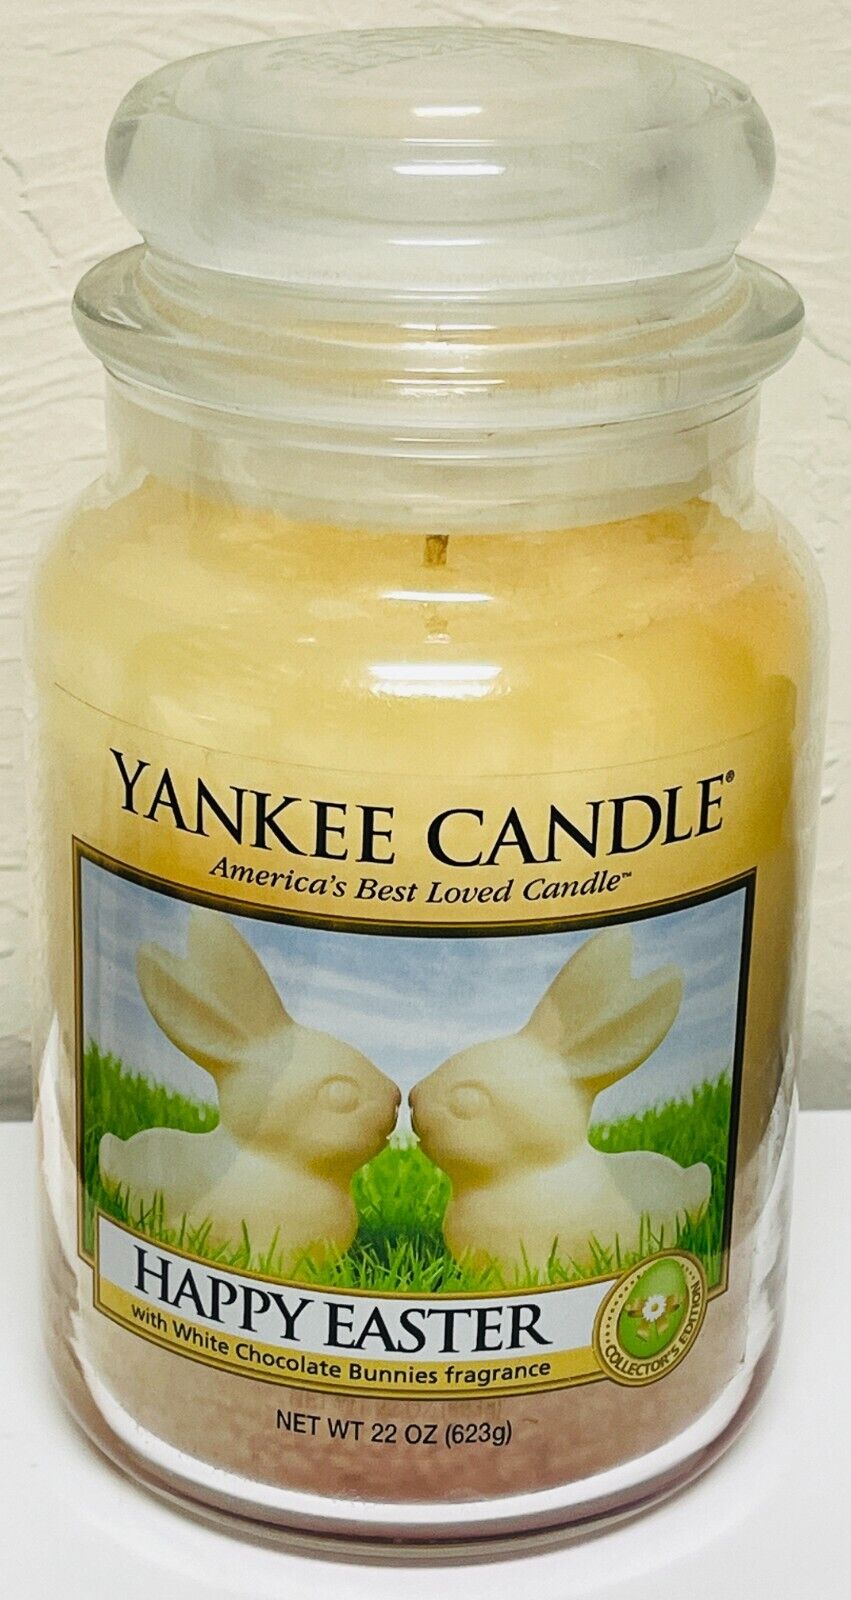 Yankee Candle Happy Easter 22 oz Jar NEW Collector Edition White Chocolate Bunny